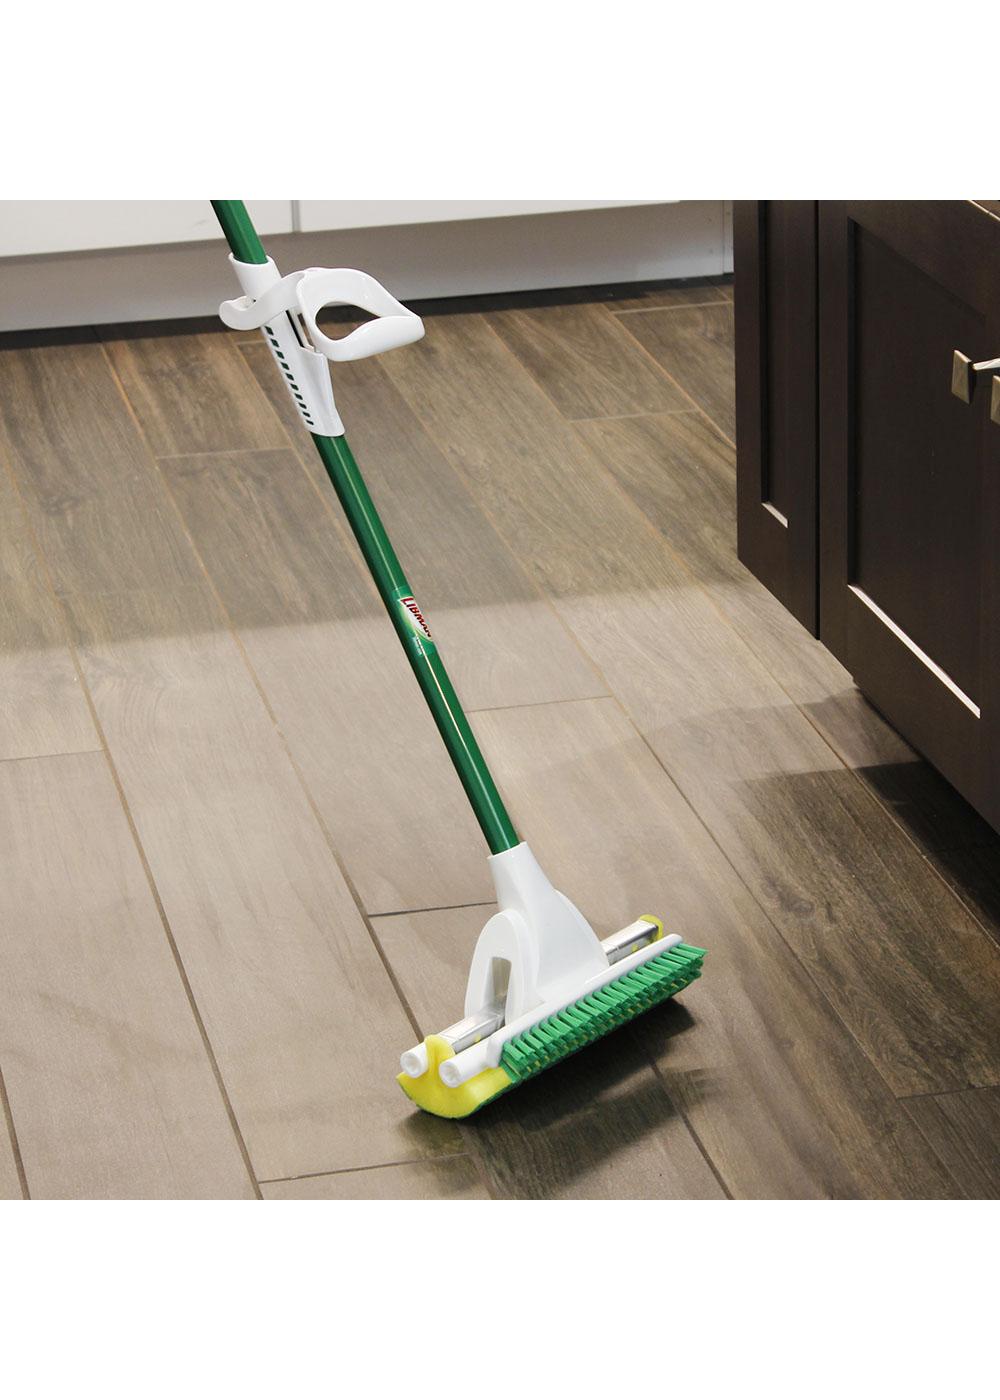 Libman Nitty Gritty Roller Mop Refill; image 4 of 4